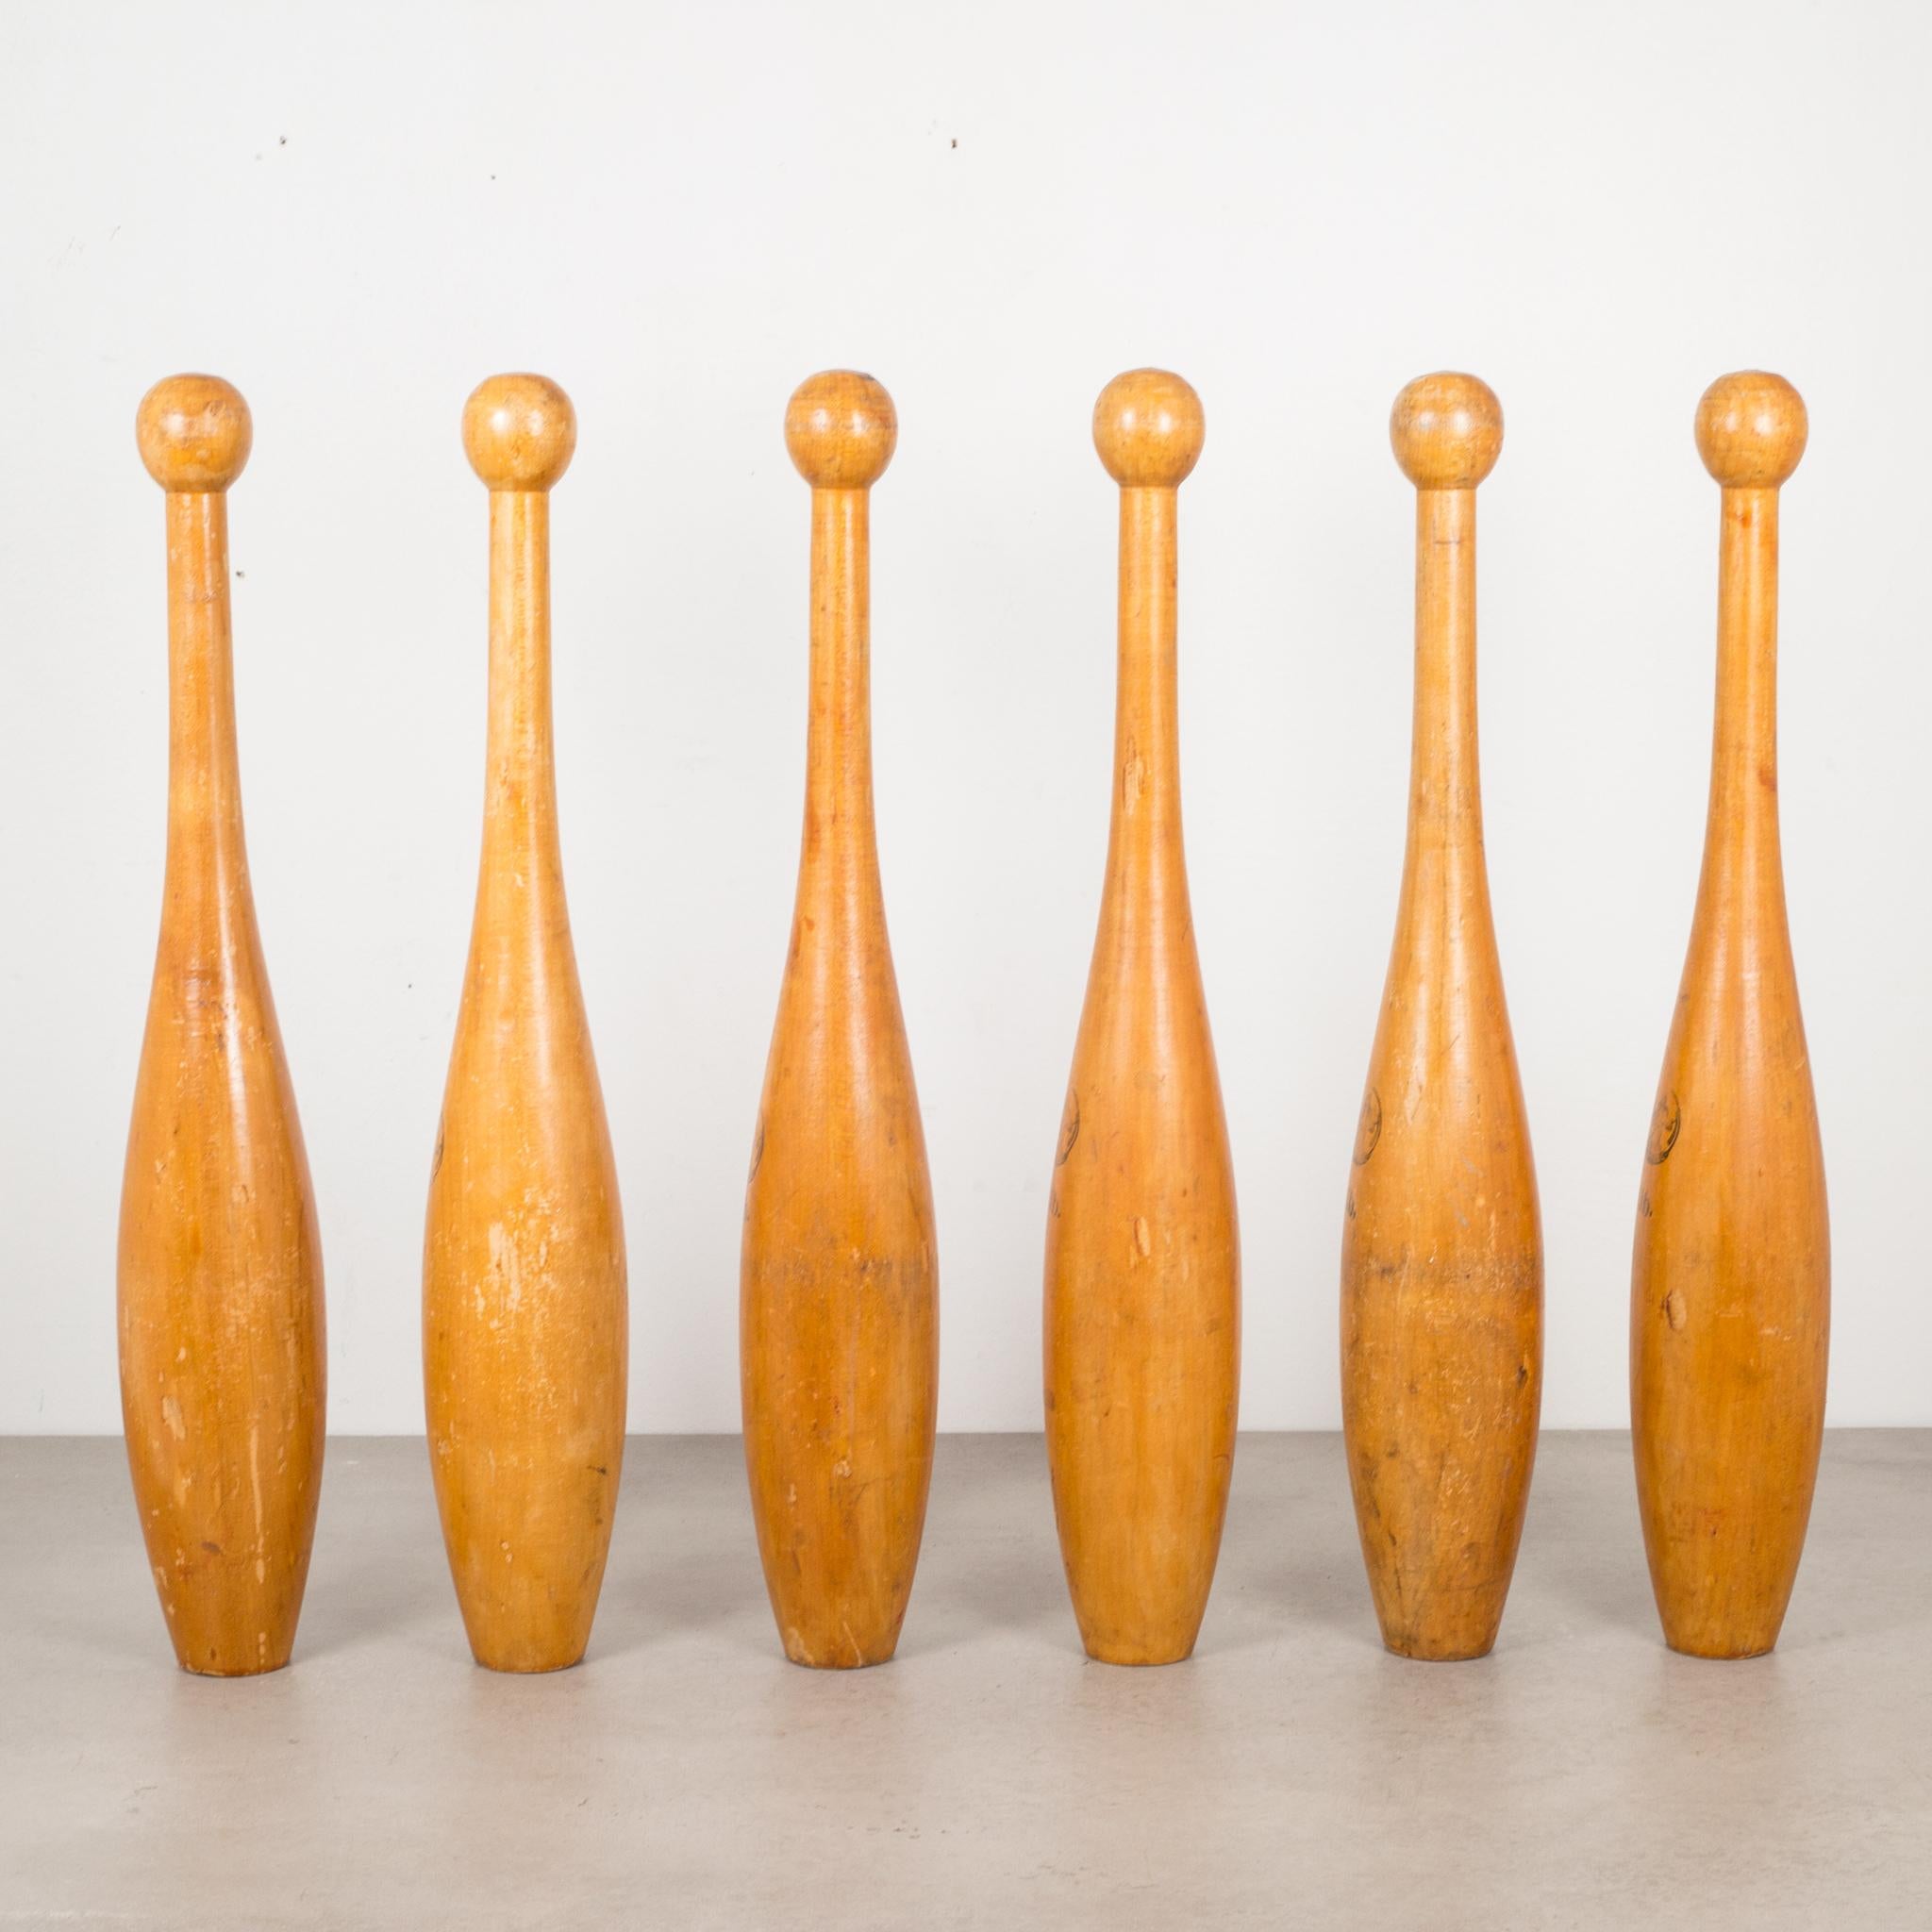 About

A collection of 4 antique solid wooden exercise/juggling with 